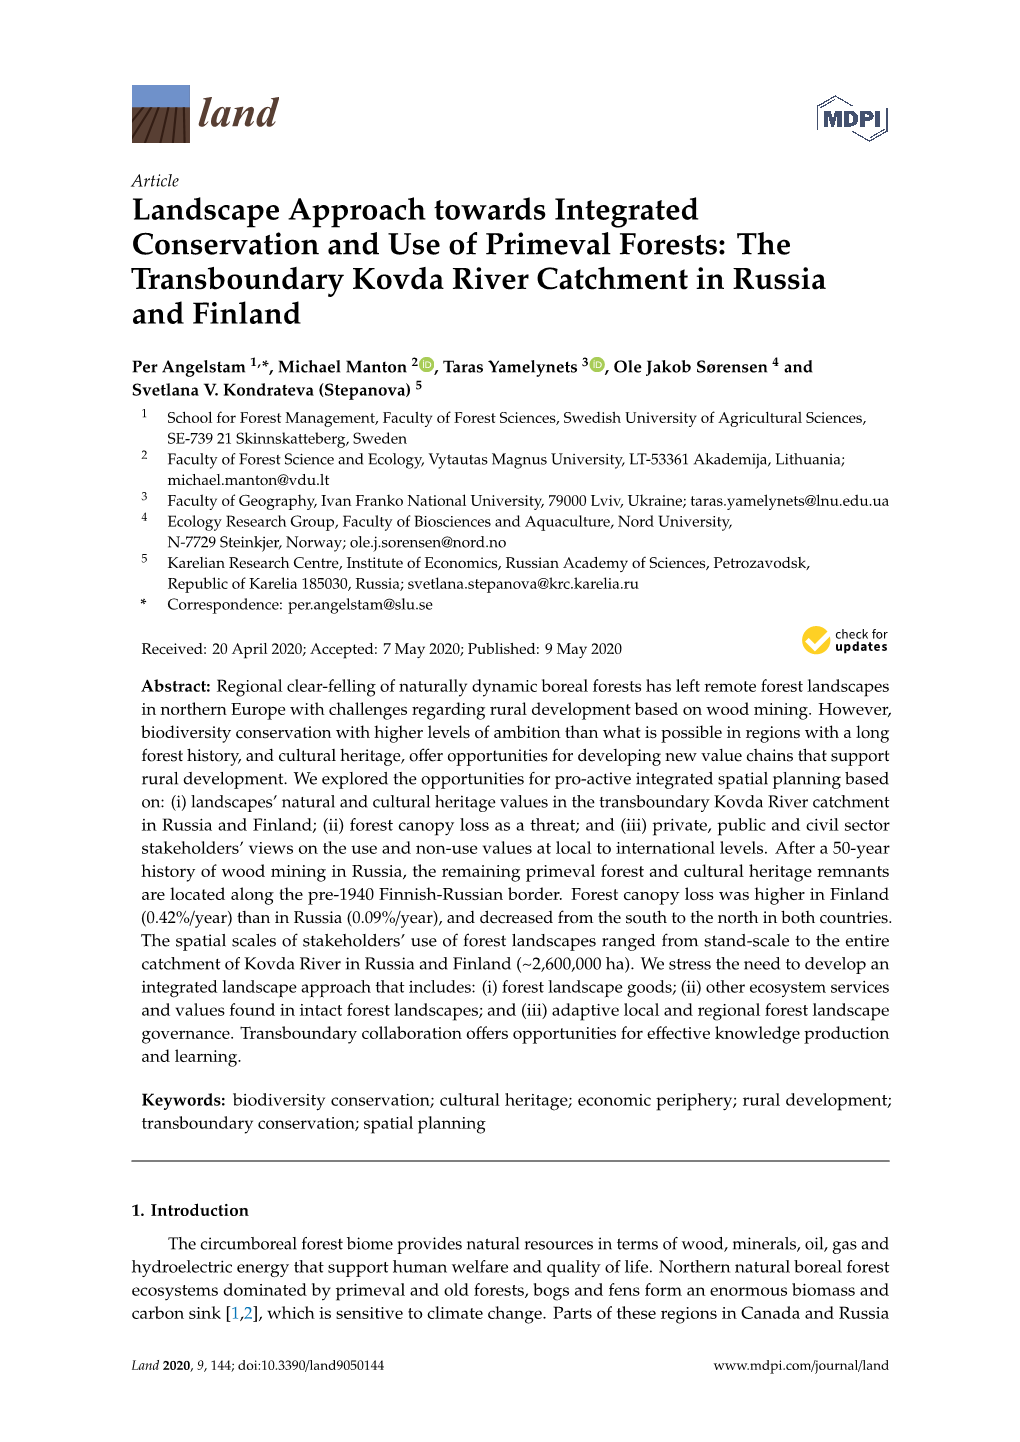 Landscape Approach Towards Integrated Conservation and Use of Primeval Forests: the Transboundary Kovda River Catchment in Russia and Finland